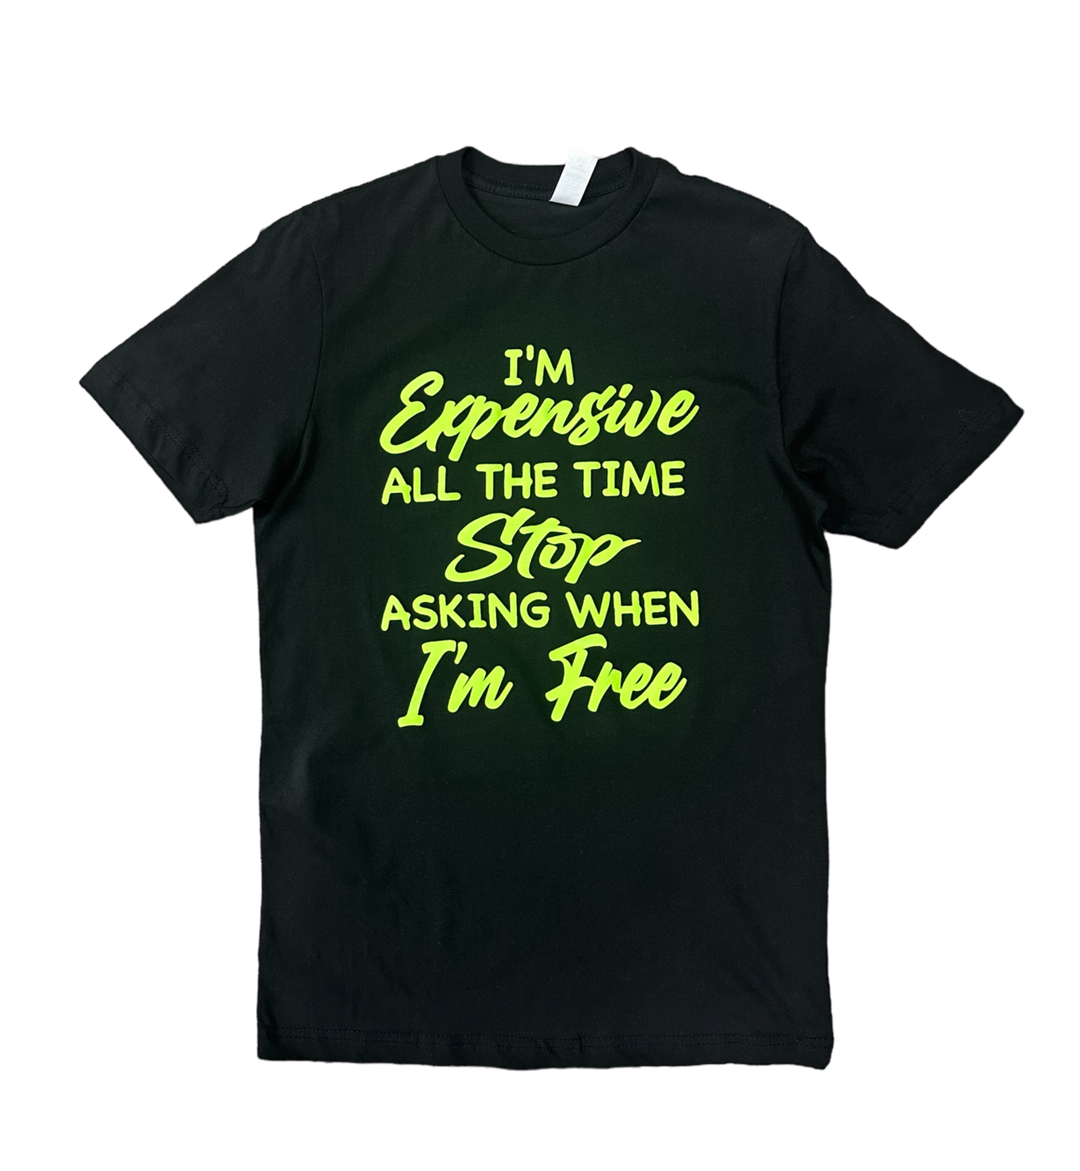 a black t - shirt that says i'm expensive all the time stop asking